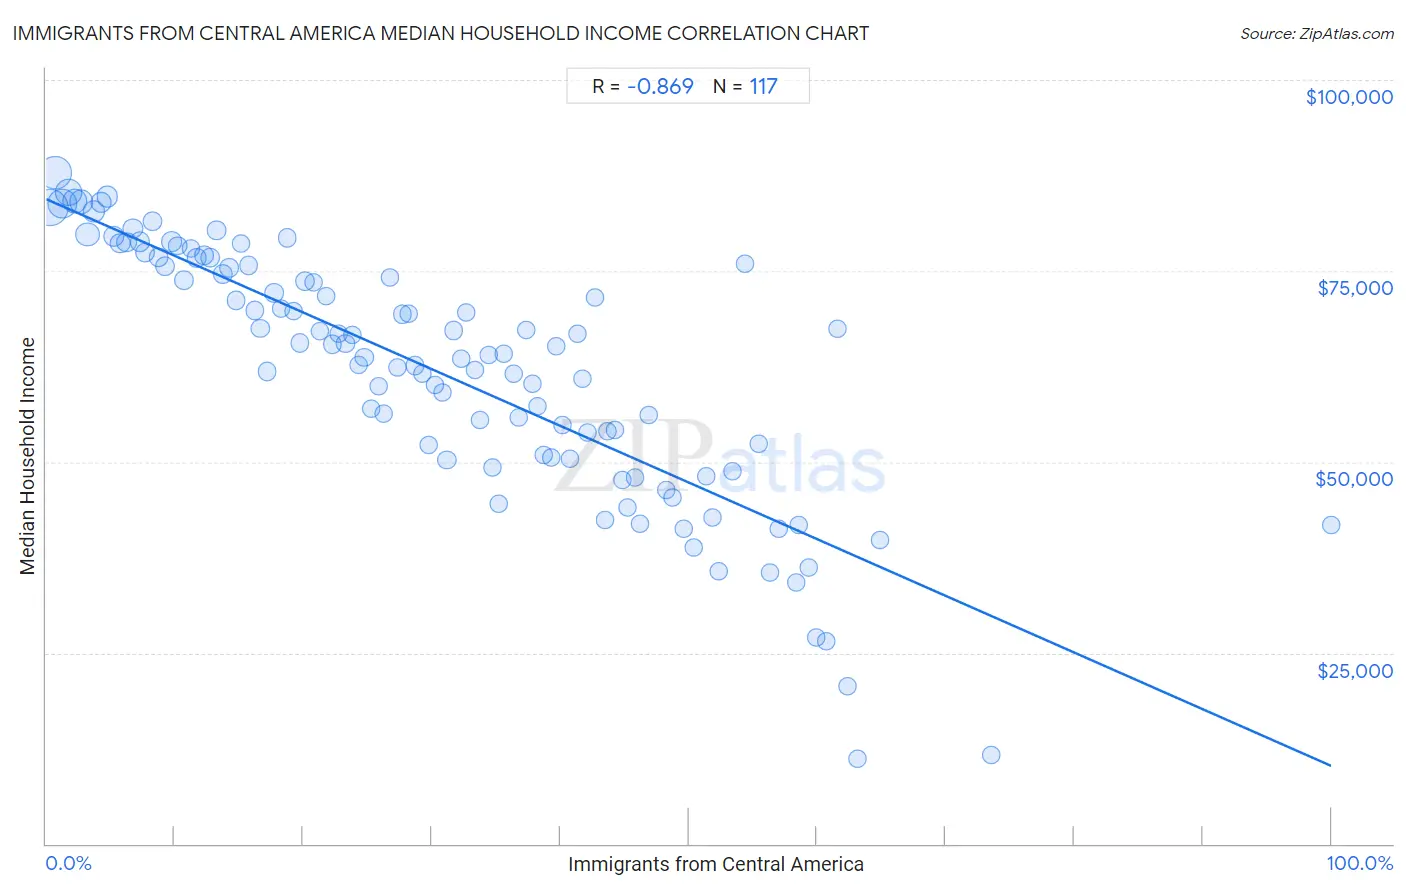 Immigrants from Central America Median Household Income